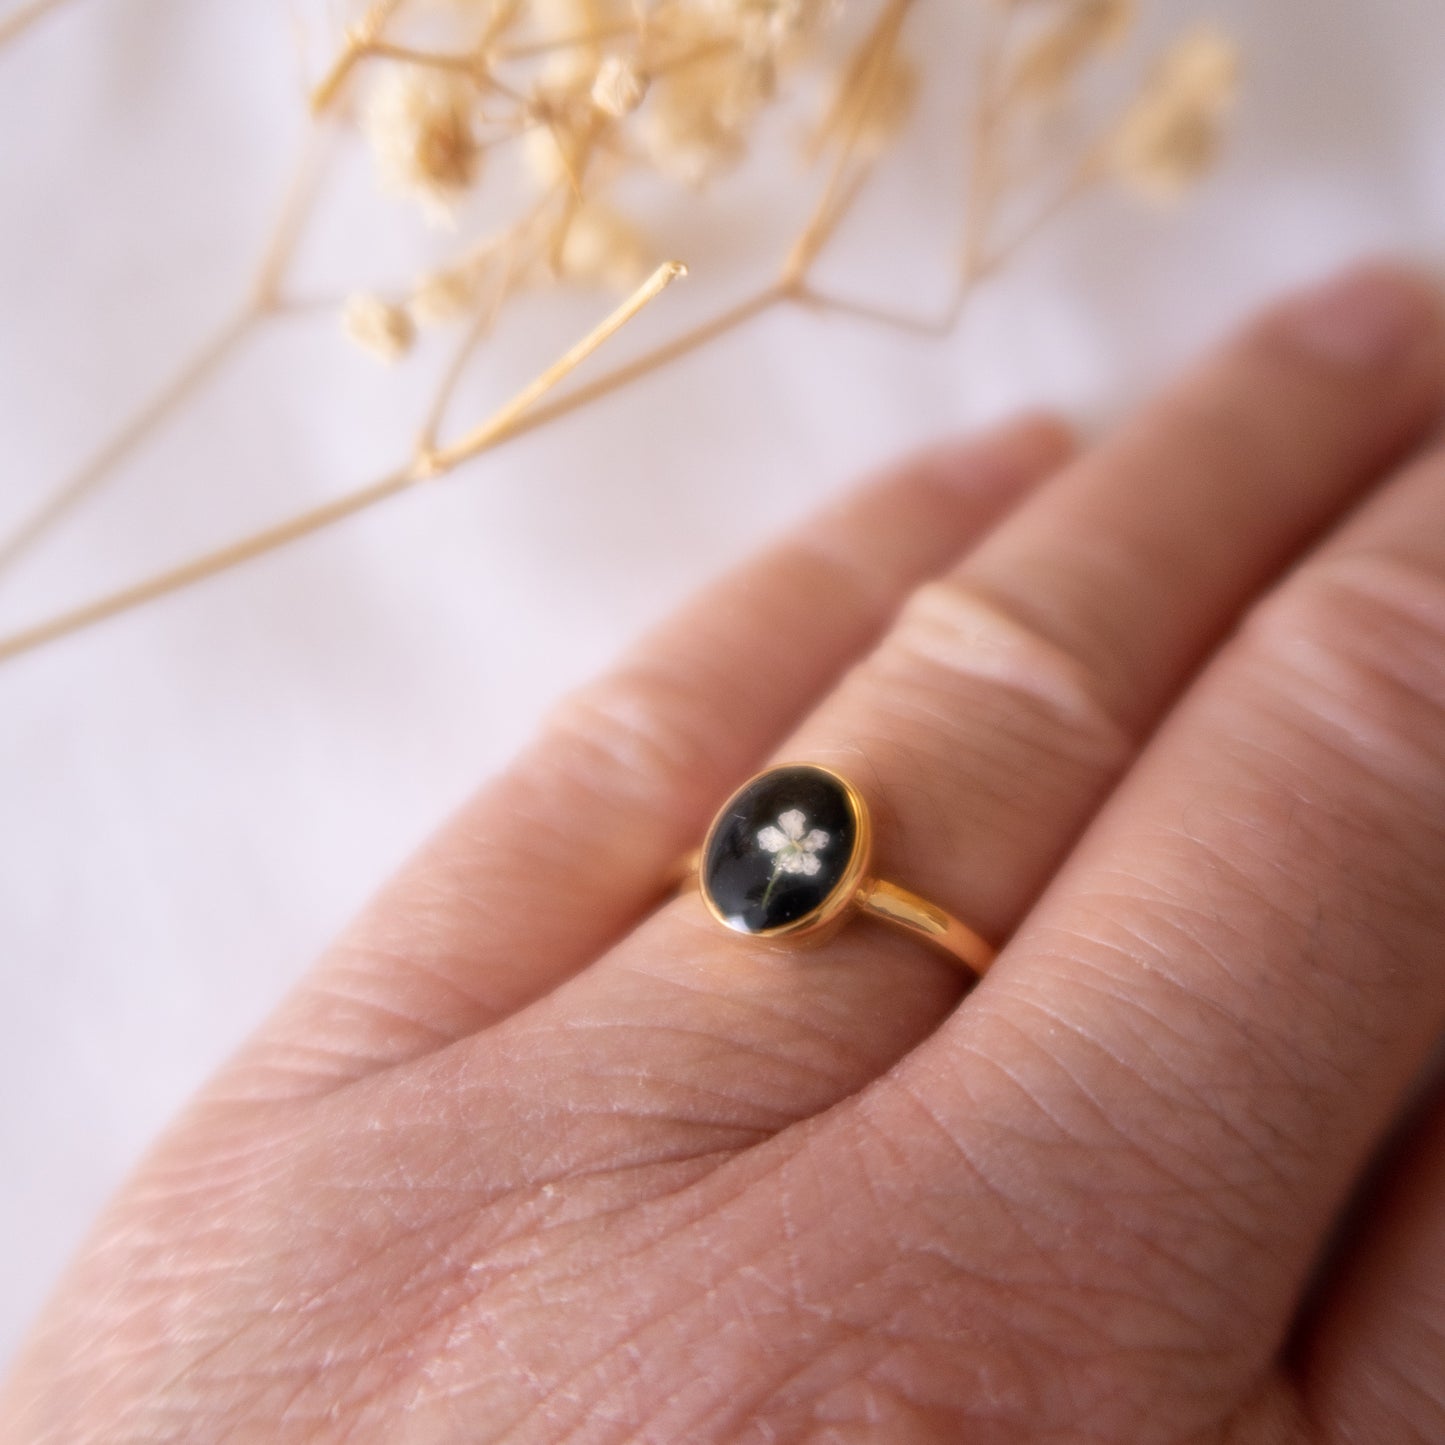 Starry Night Queen Annes Lace Ring